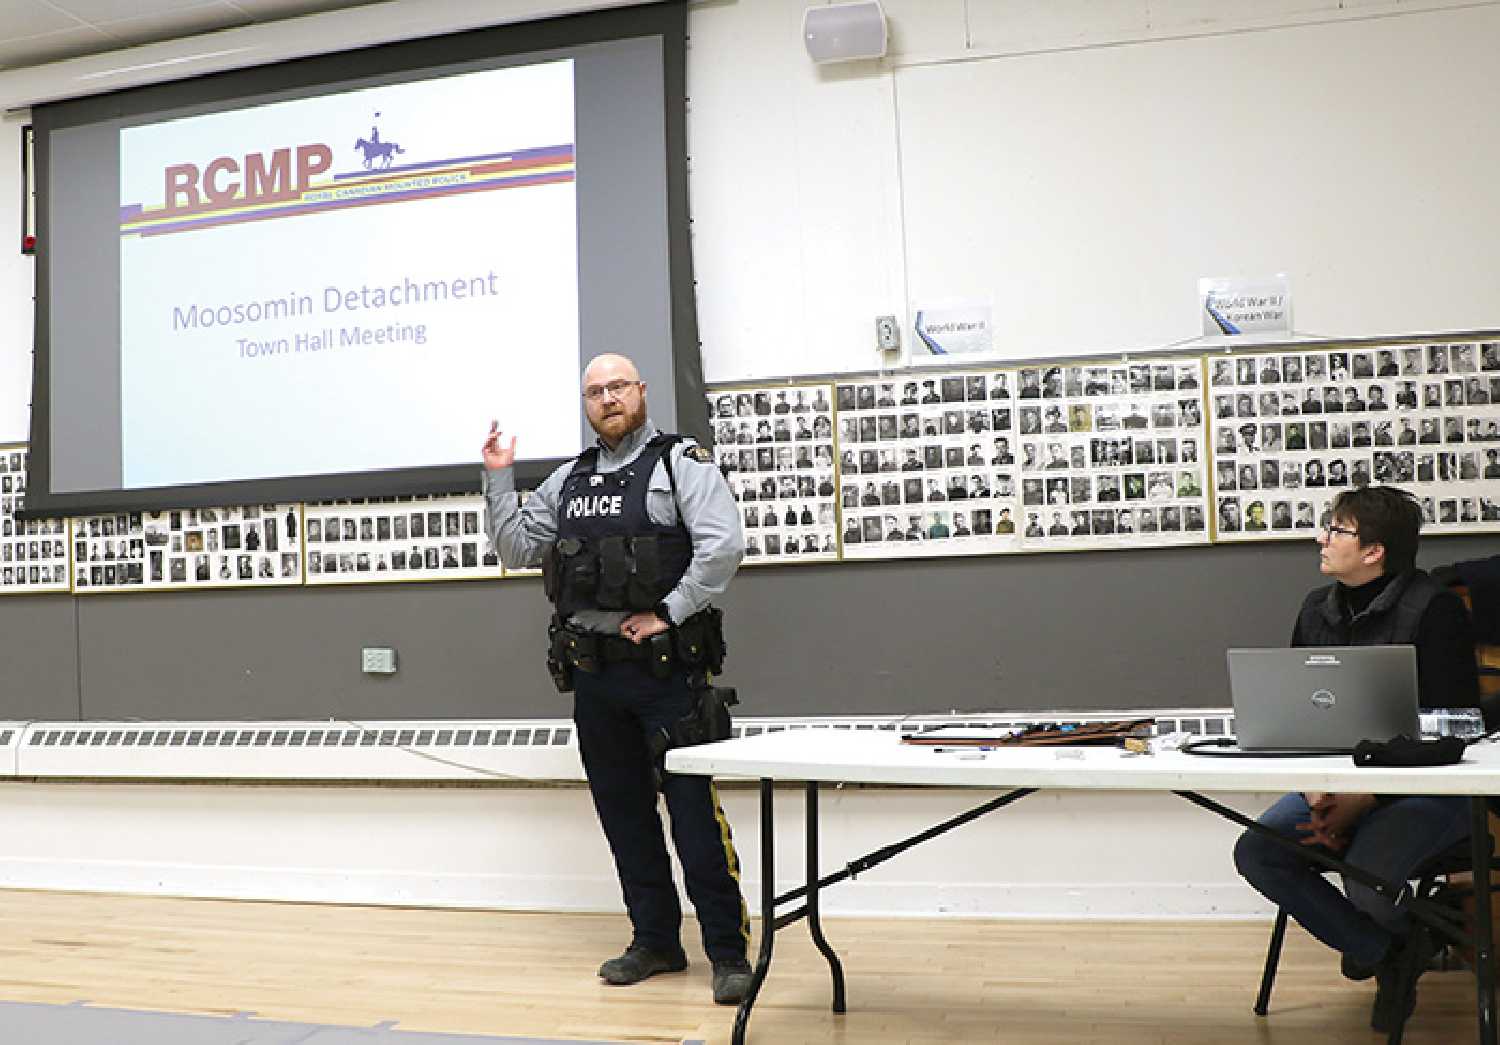 Sgt. Damien Grouchy speaking at the Moosomin RCMP Town Hall Meeting on March 28.